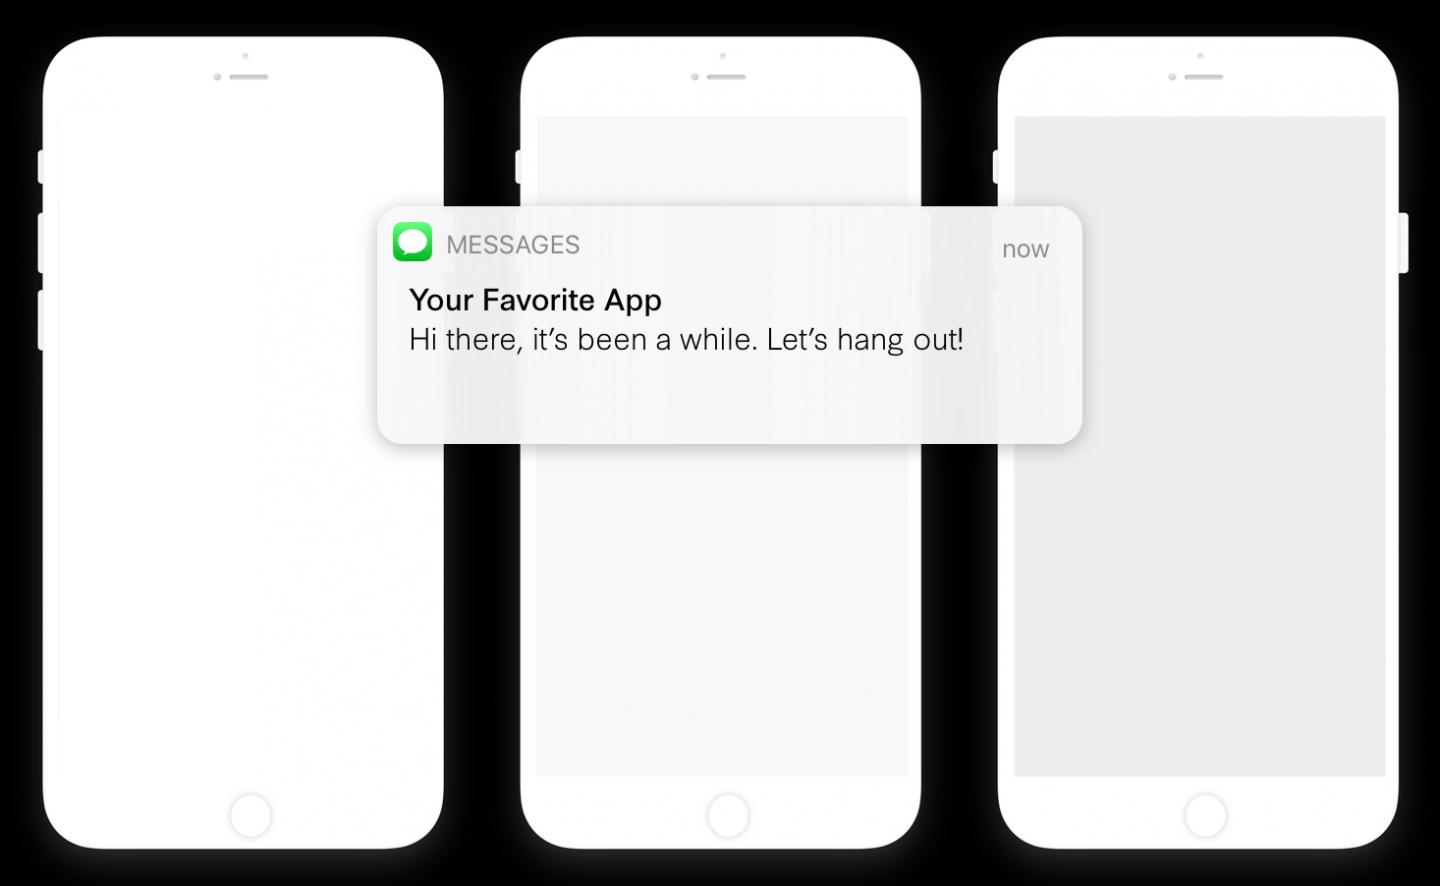 A Notification from Your Favorite App